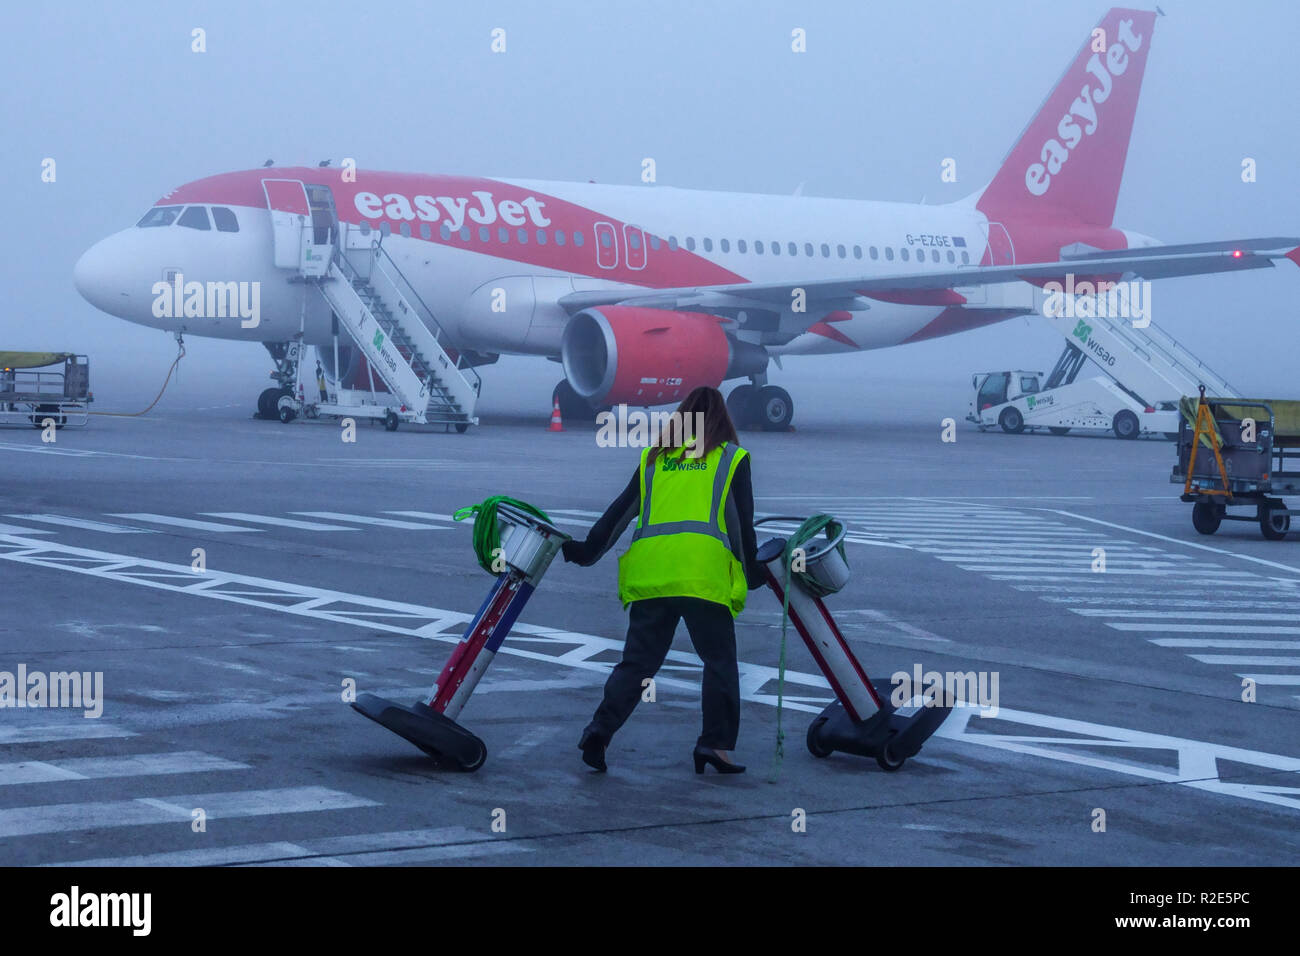 Berlin Tegel airport, aircraft Easyjet in the morning mist Stock Photo